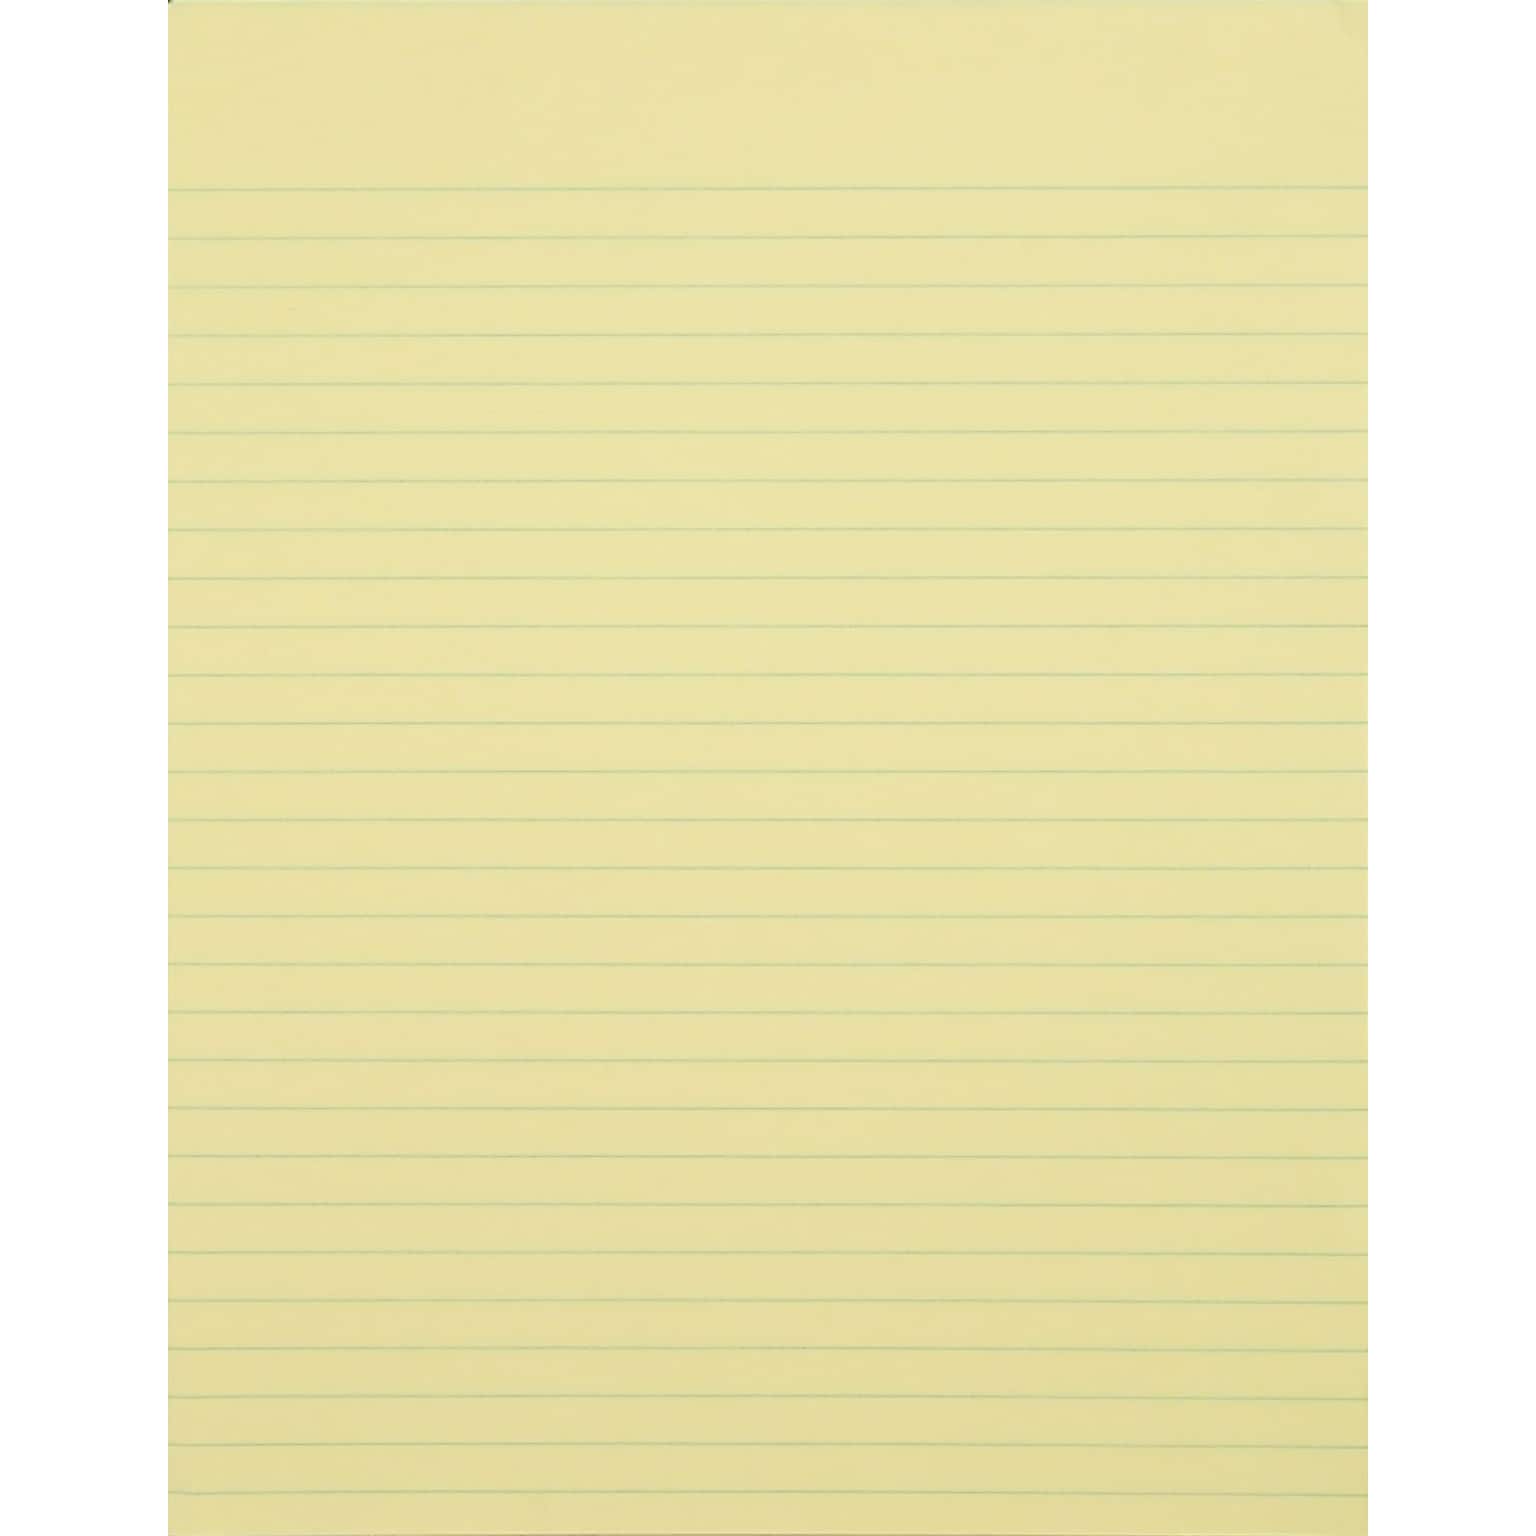 Glue-Top Writing Pads, 8-1/2 x 11, Wide Rule, Canary